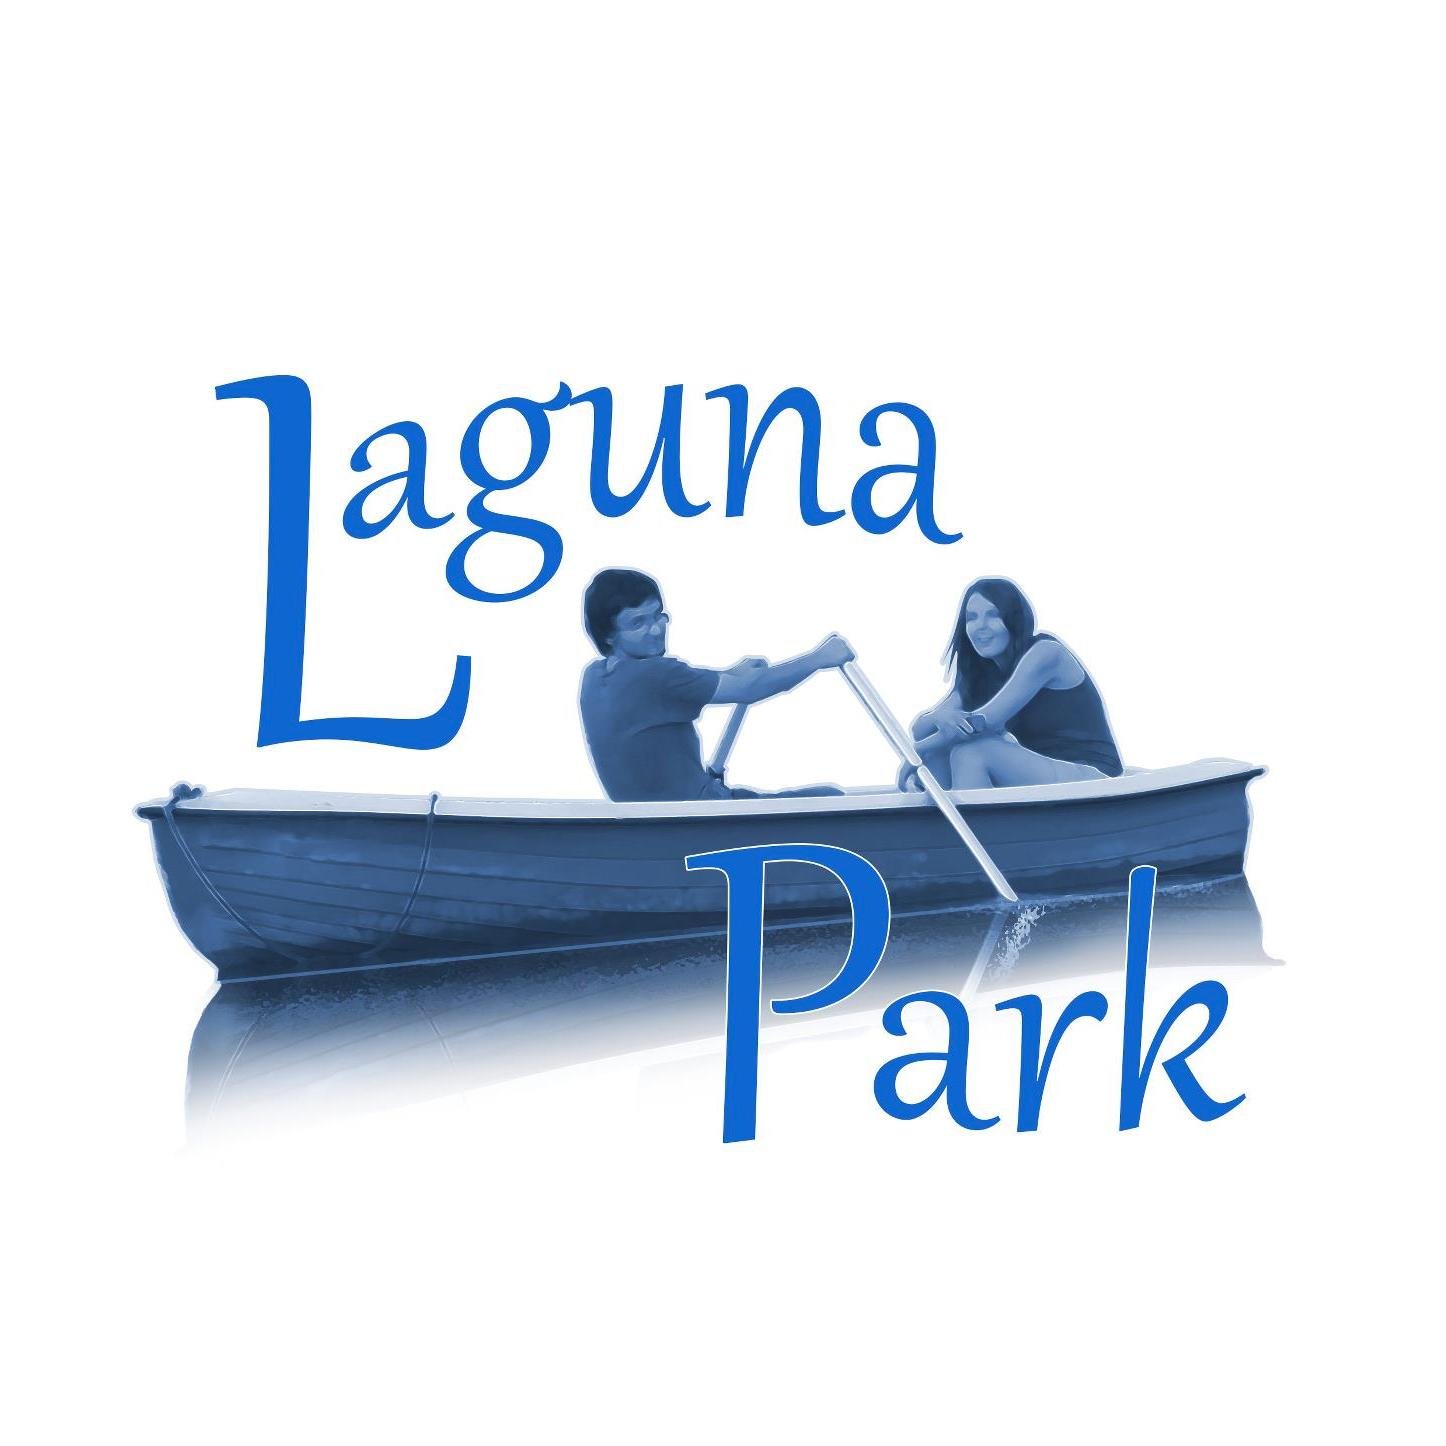 Laguna Park is a romantic, relaxing place in the capital of Republic of Moldova, Chisinau. Rent a boat or a waterbike to keep your soul and heart near nature.